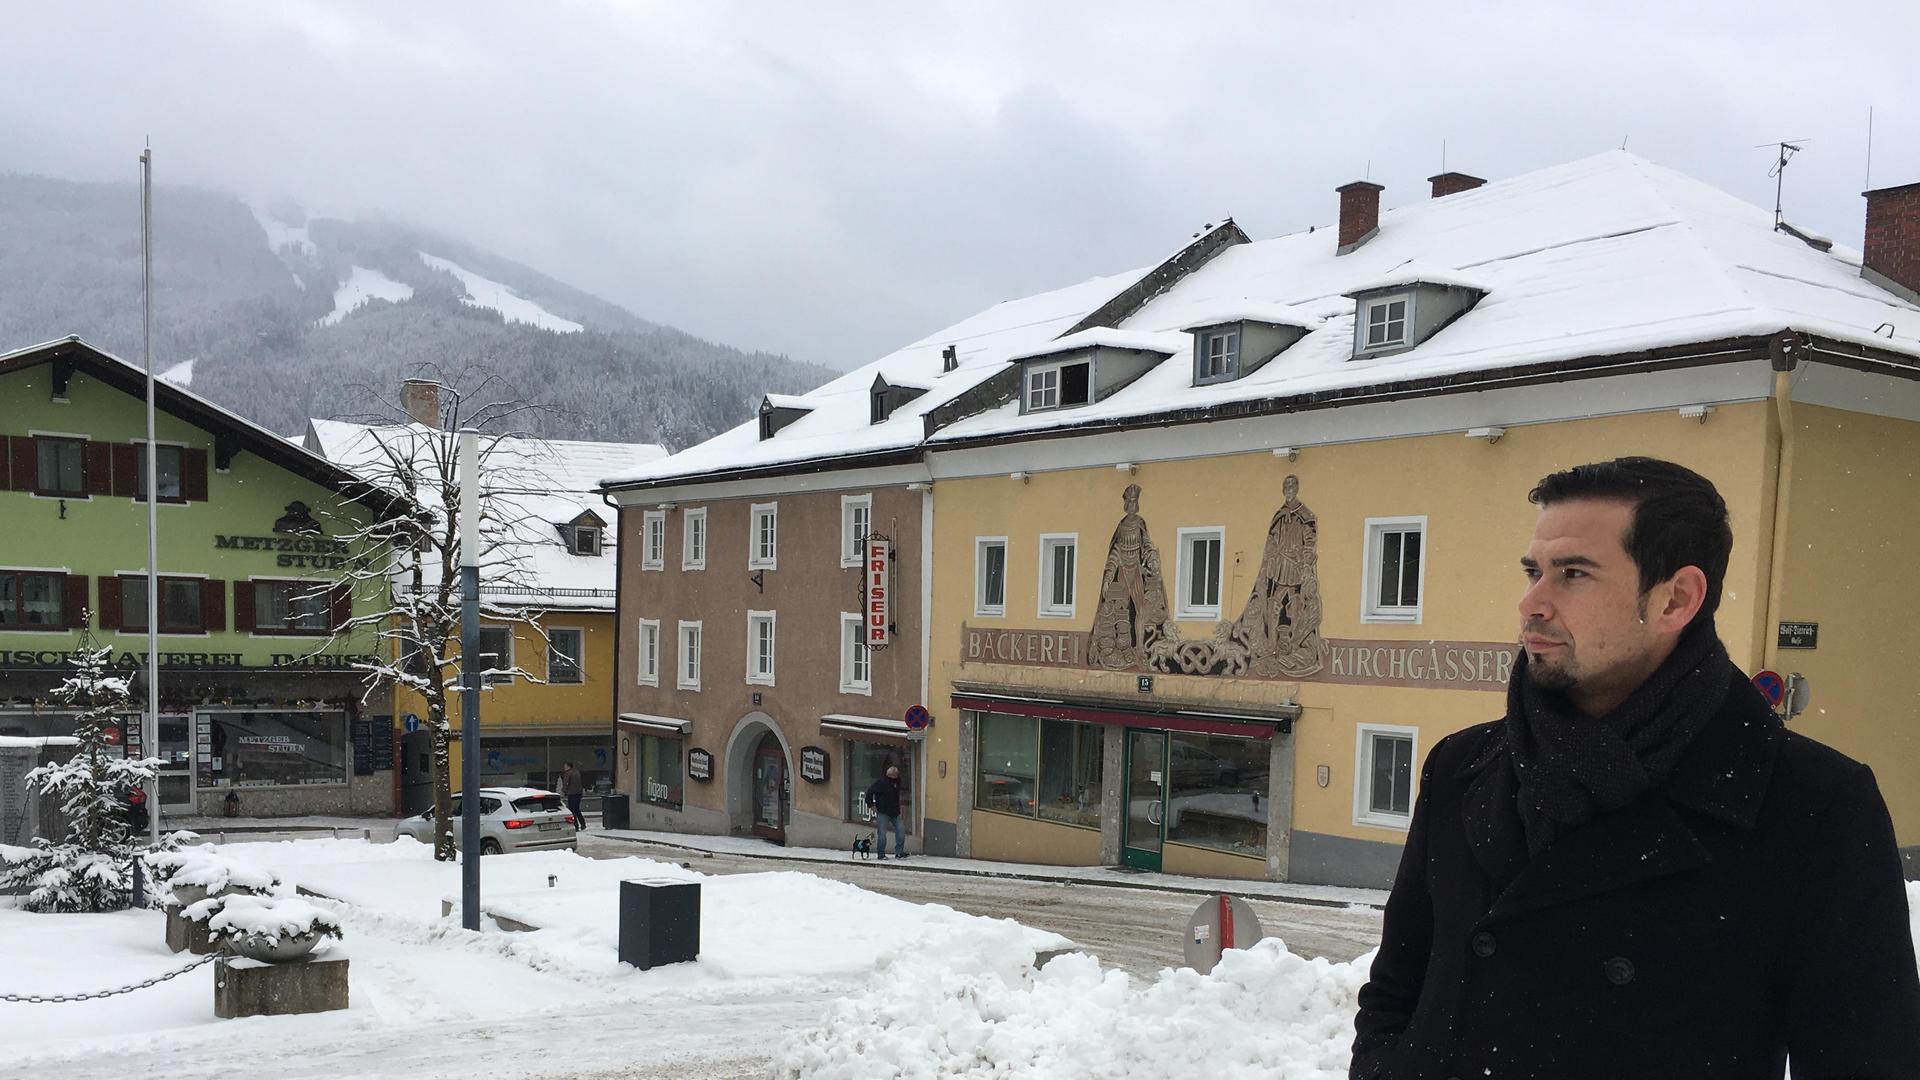 Christian Koblinger, head of tourism in Radstadt, Austria, says the winter ski season is a major economic driver in his community. 